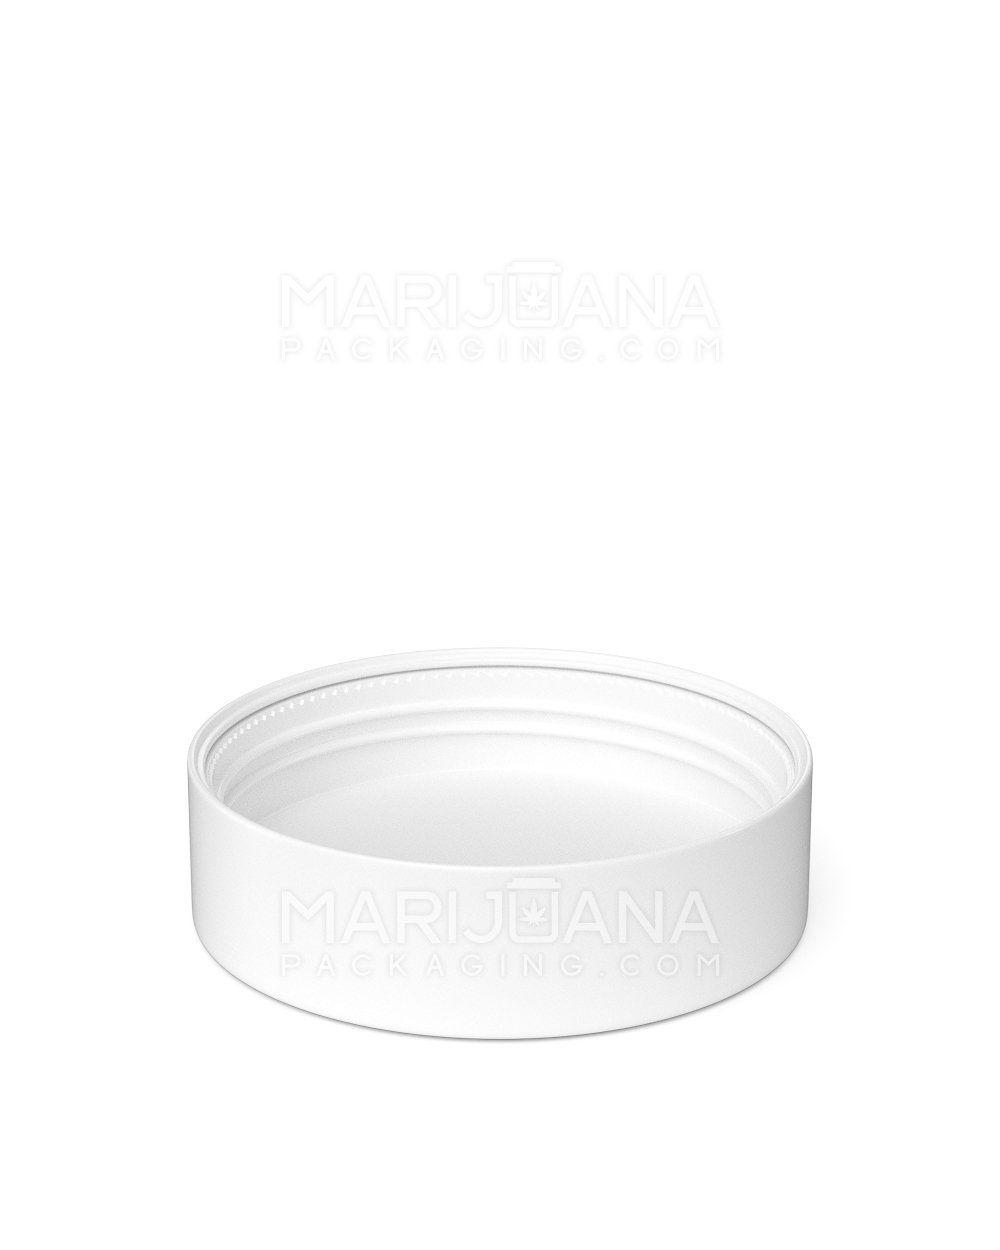 Child Resistant | Smooth Push Down & Turn Plastic Caps w/ Foam Liner | 63mm - Semi Gloss White - 96 Count - 4